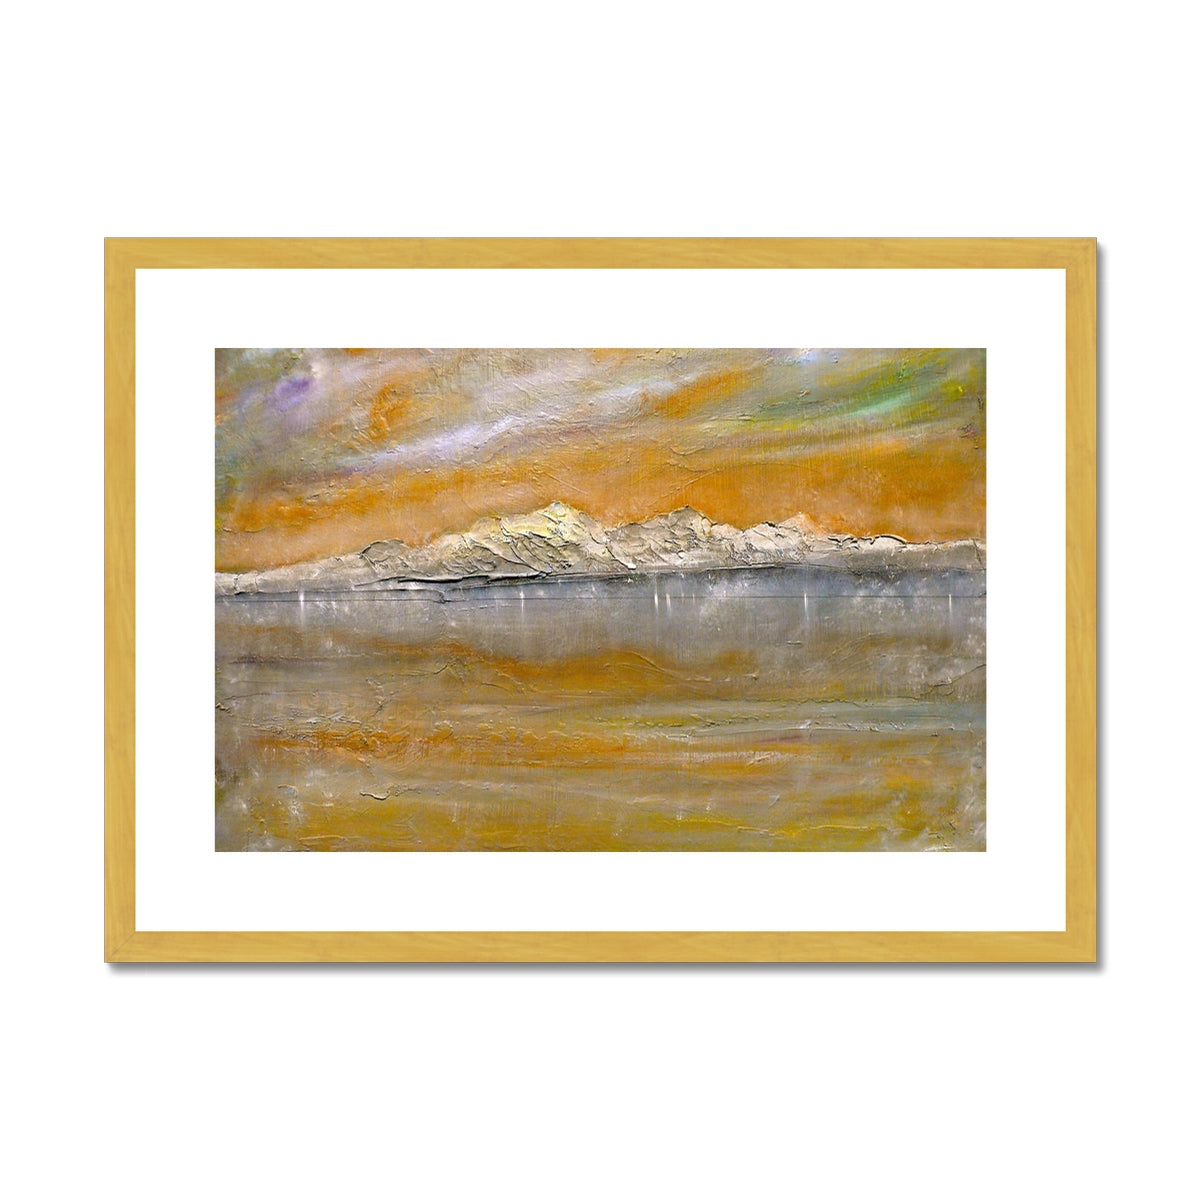 Arran Snow Painting | Antique Framed & Mounted Prints From Scotland-Antique Framed & Mounted Prints-Arran Art Gallery-A2 Landscape-Gold Frame-Paintings, Prints, Homeware, Art Gifts From Scotland By Scottish Artist Kevin Hunter